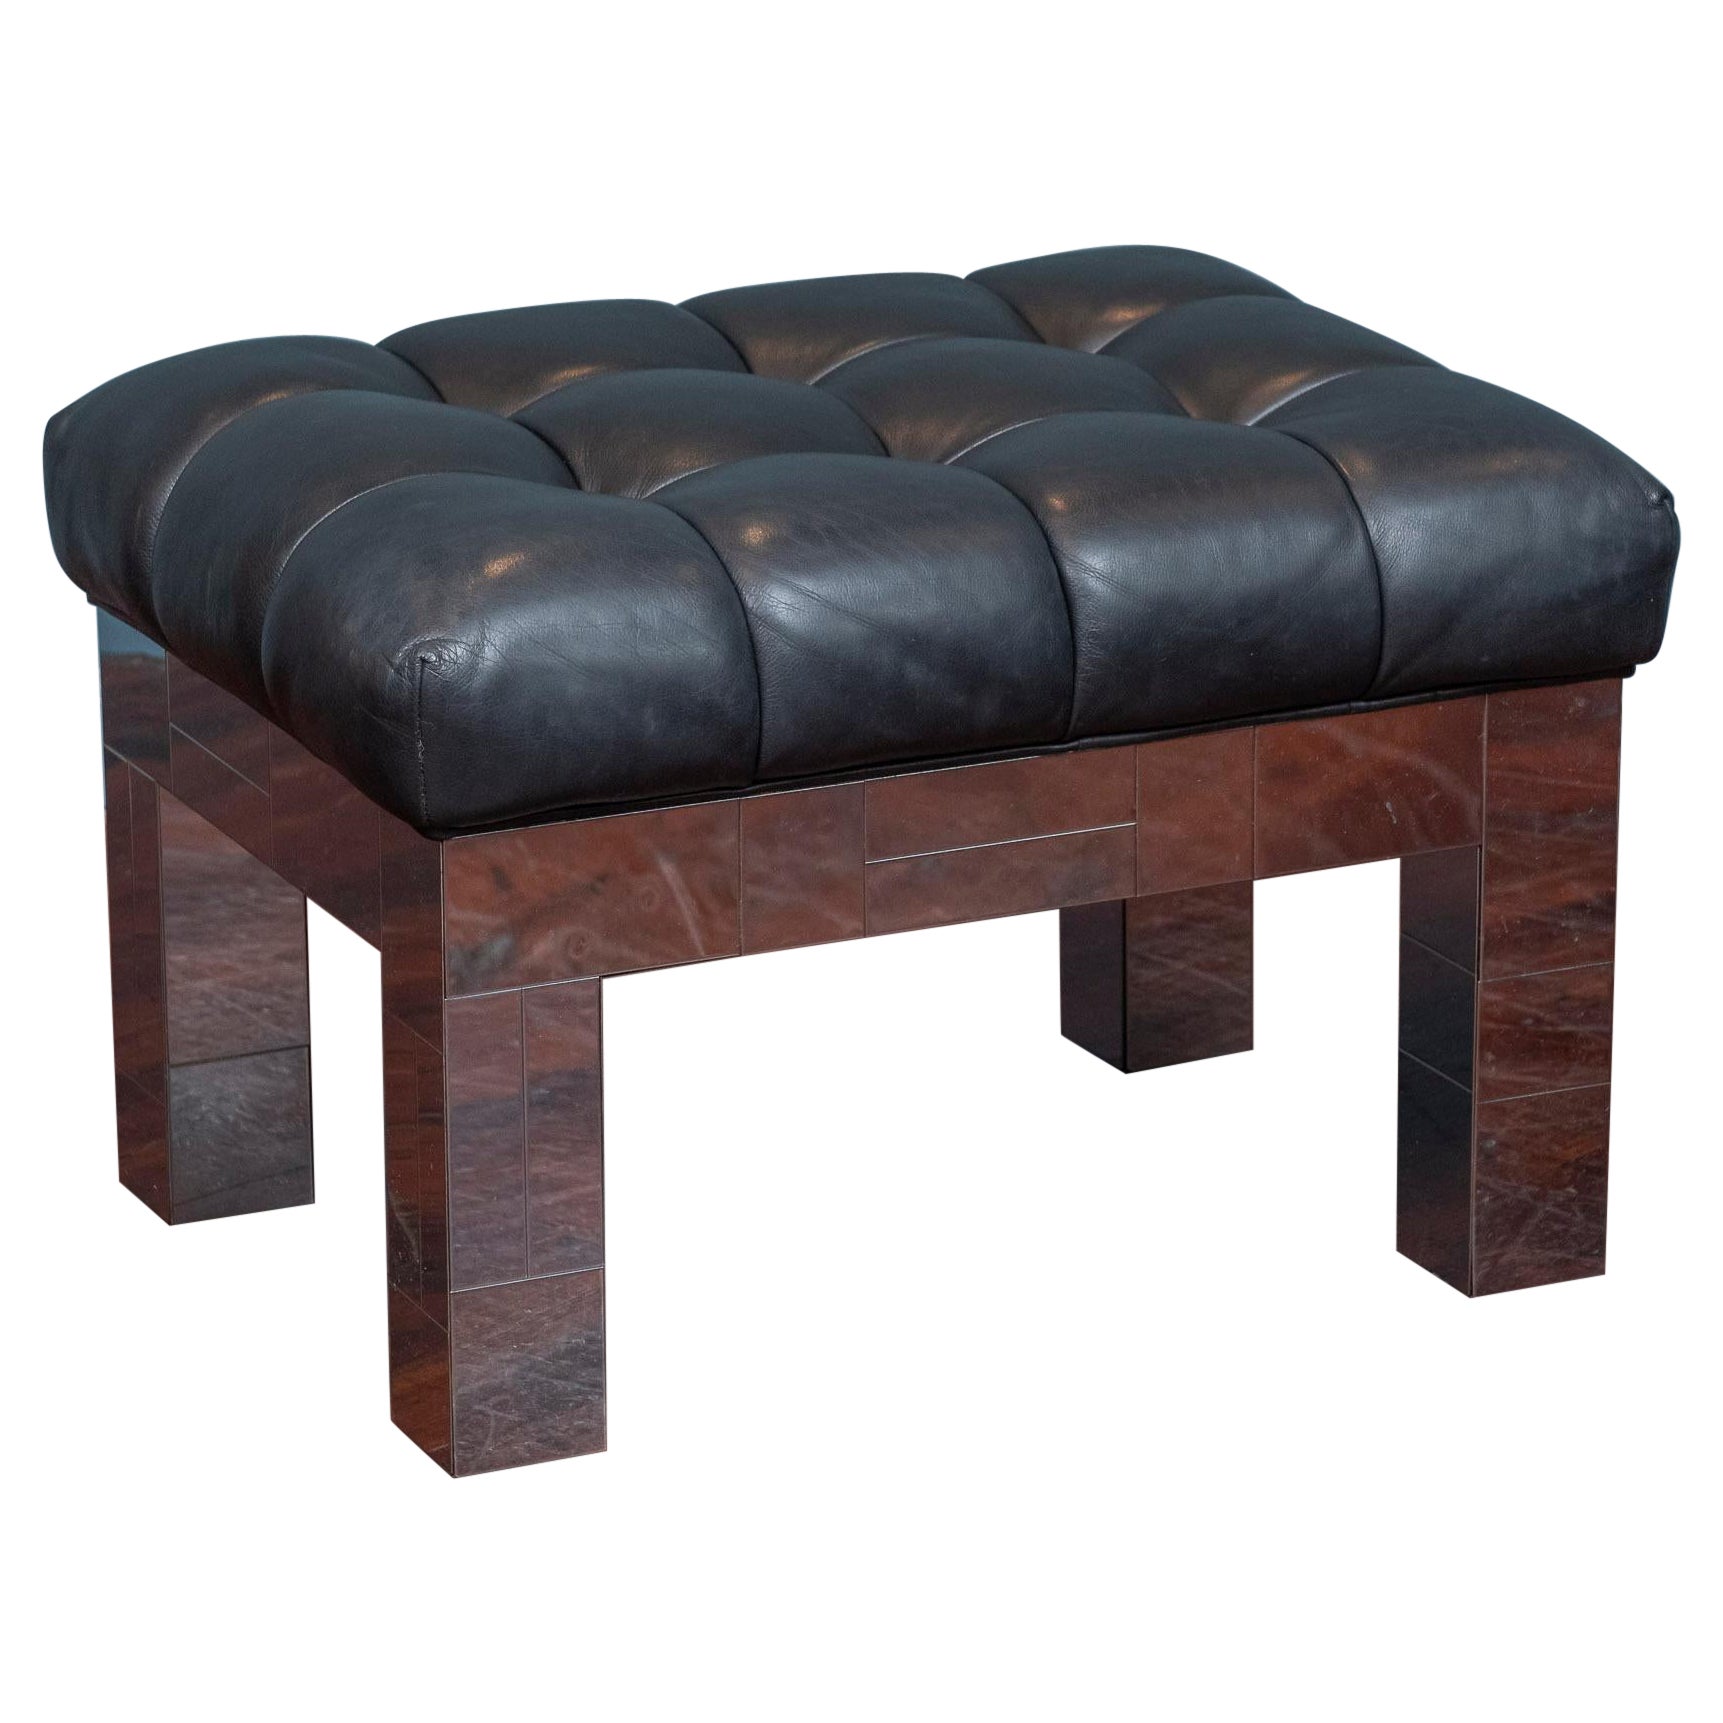 Paul Evans Cityscape Stool or Bench